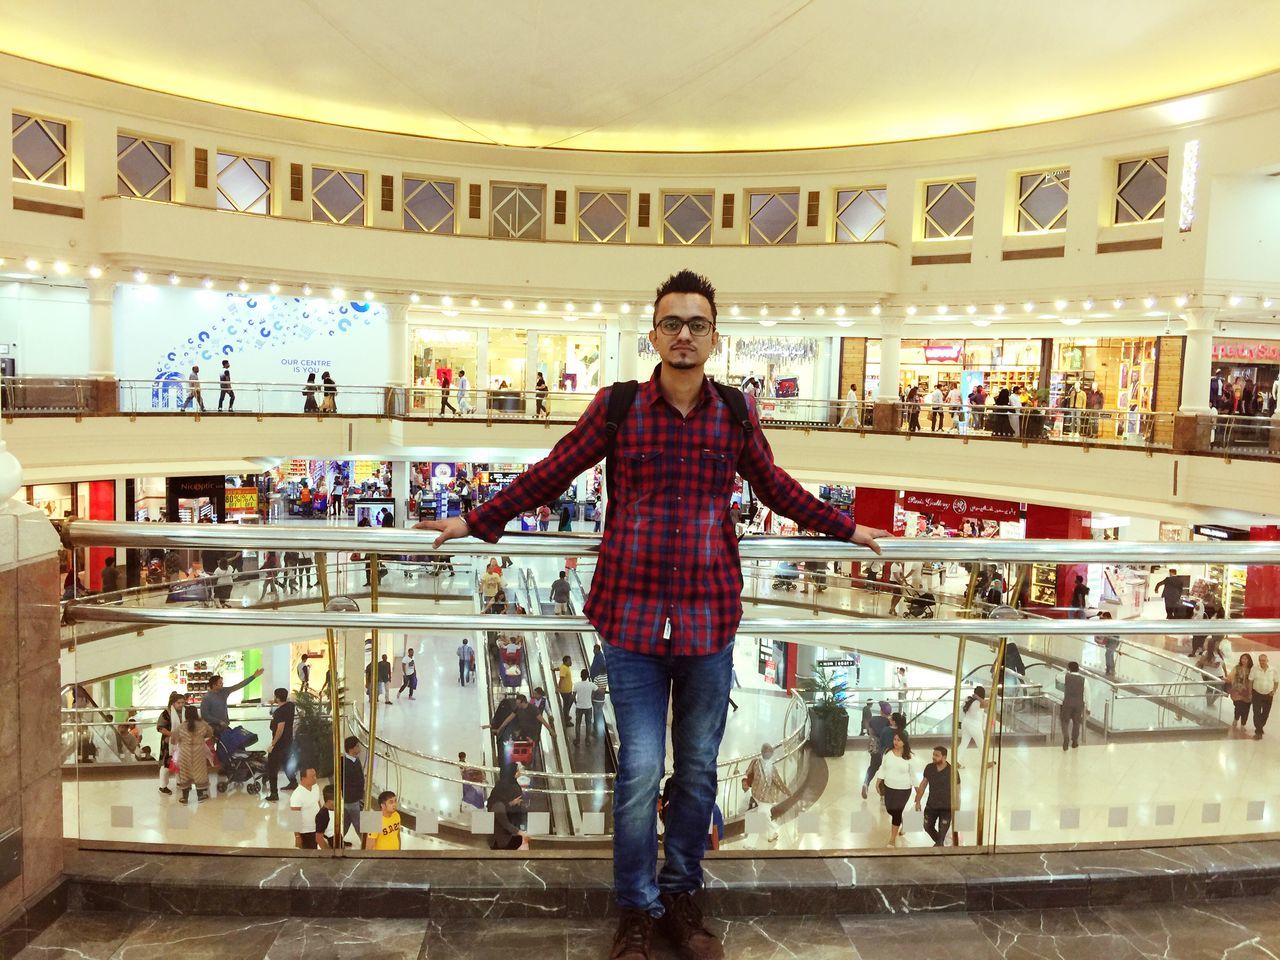 front view, standing, store, one person, looking at camera, real people, portrait, indoors, lifestyles, casual clothing, shopping mall, young adult, incidental people, retail, illuminated, shopping, leisure activity, full length, emotion, consumerism, retail display, hairstyle